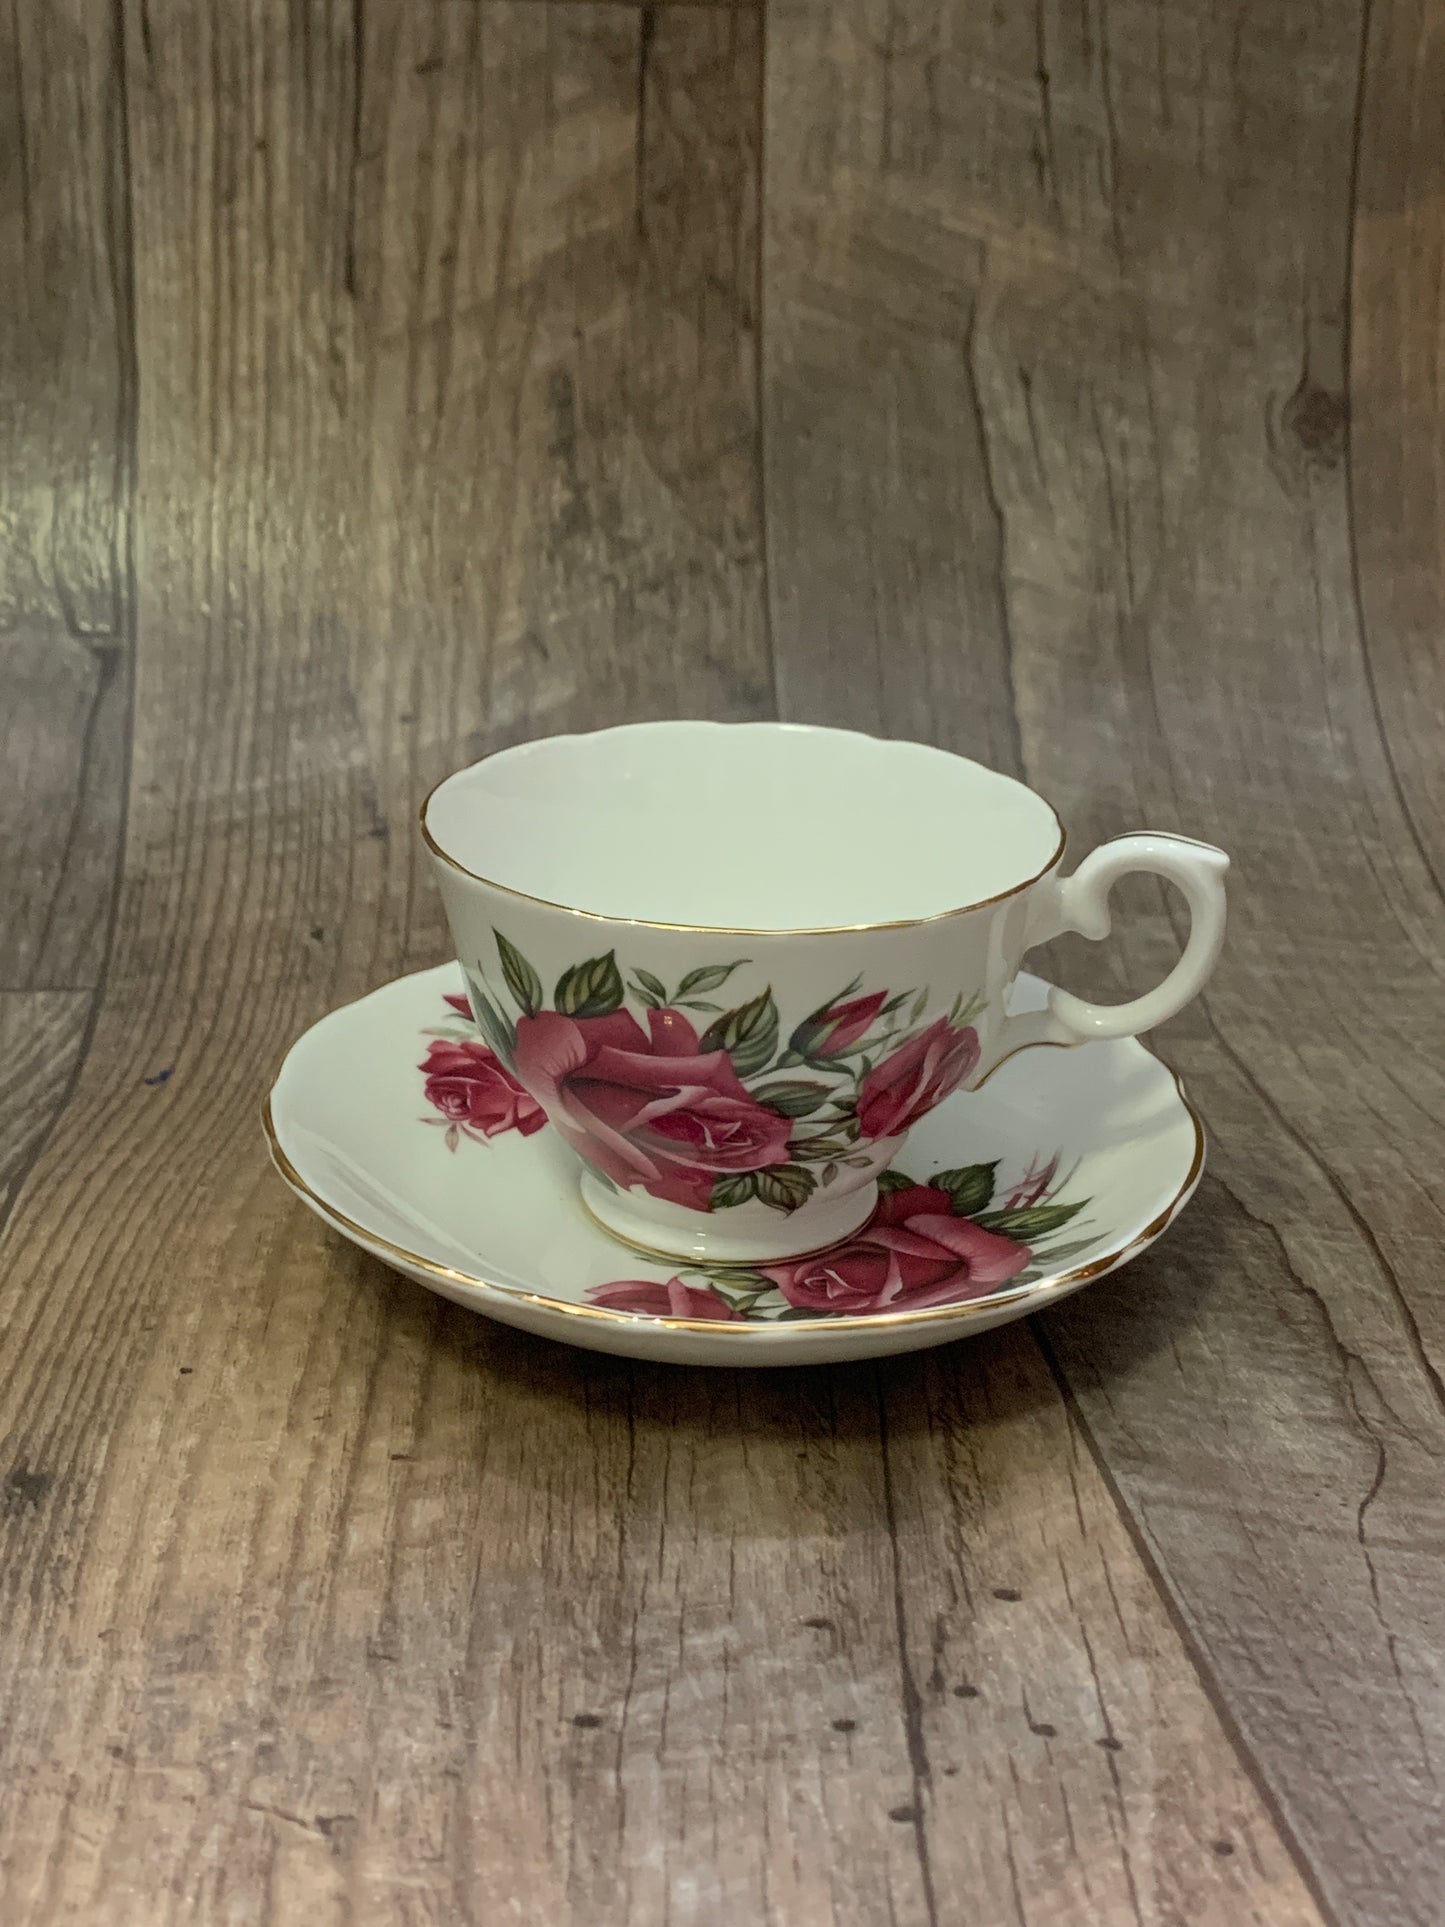 Vintage Tea Cup with Red Roses Staffordshire White Teacup with Red Roses